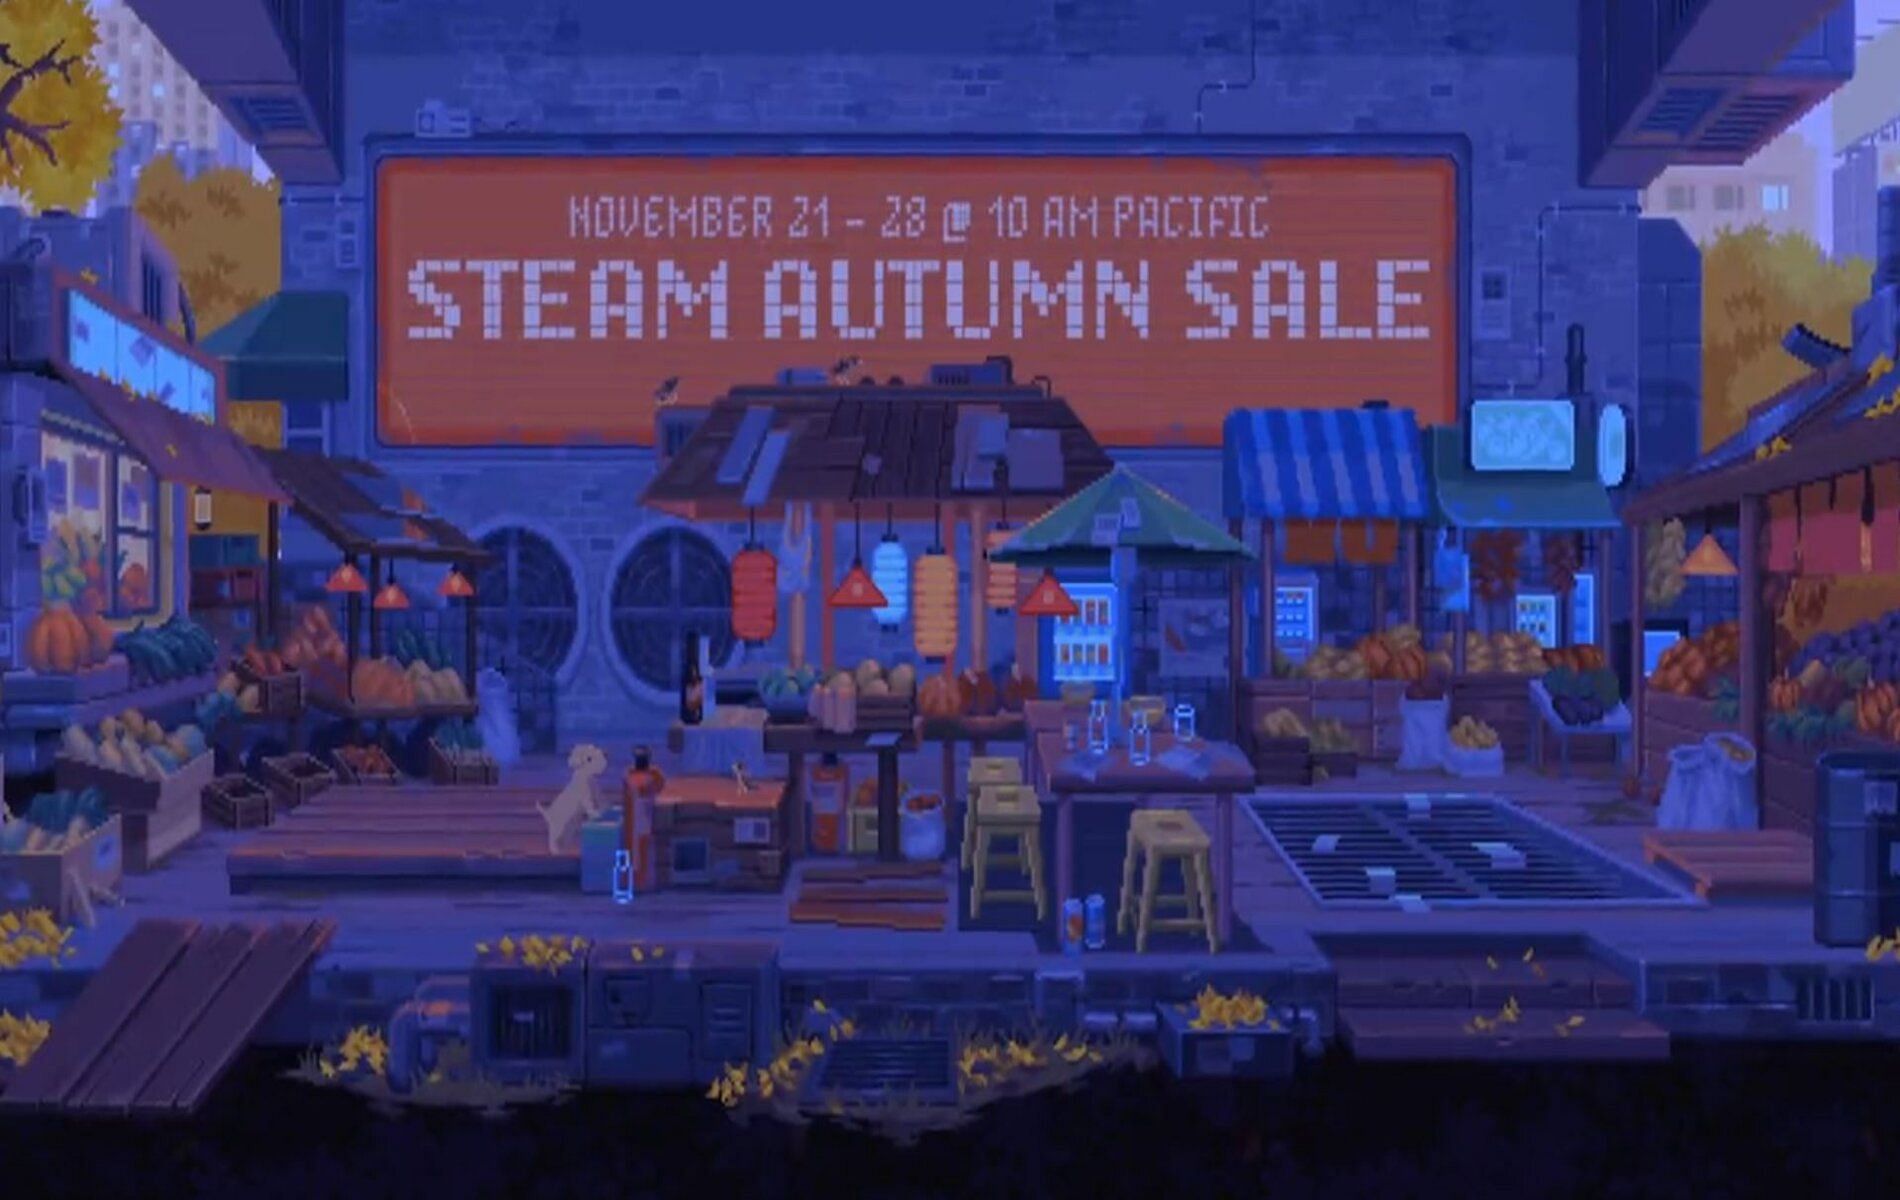 Steam Awards 2022 Voting Is Now Live: How to Vote for Each PC Game  Category, Best Steam Winter Sale Deals, More